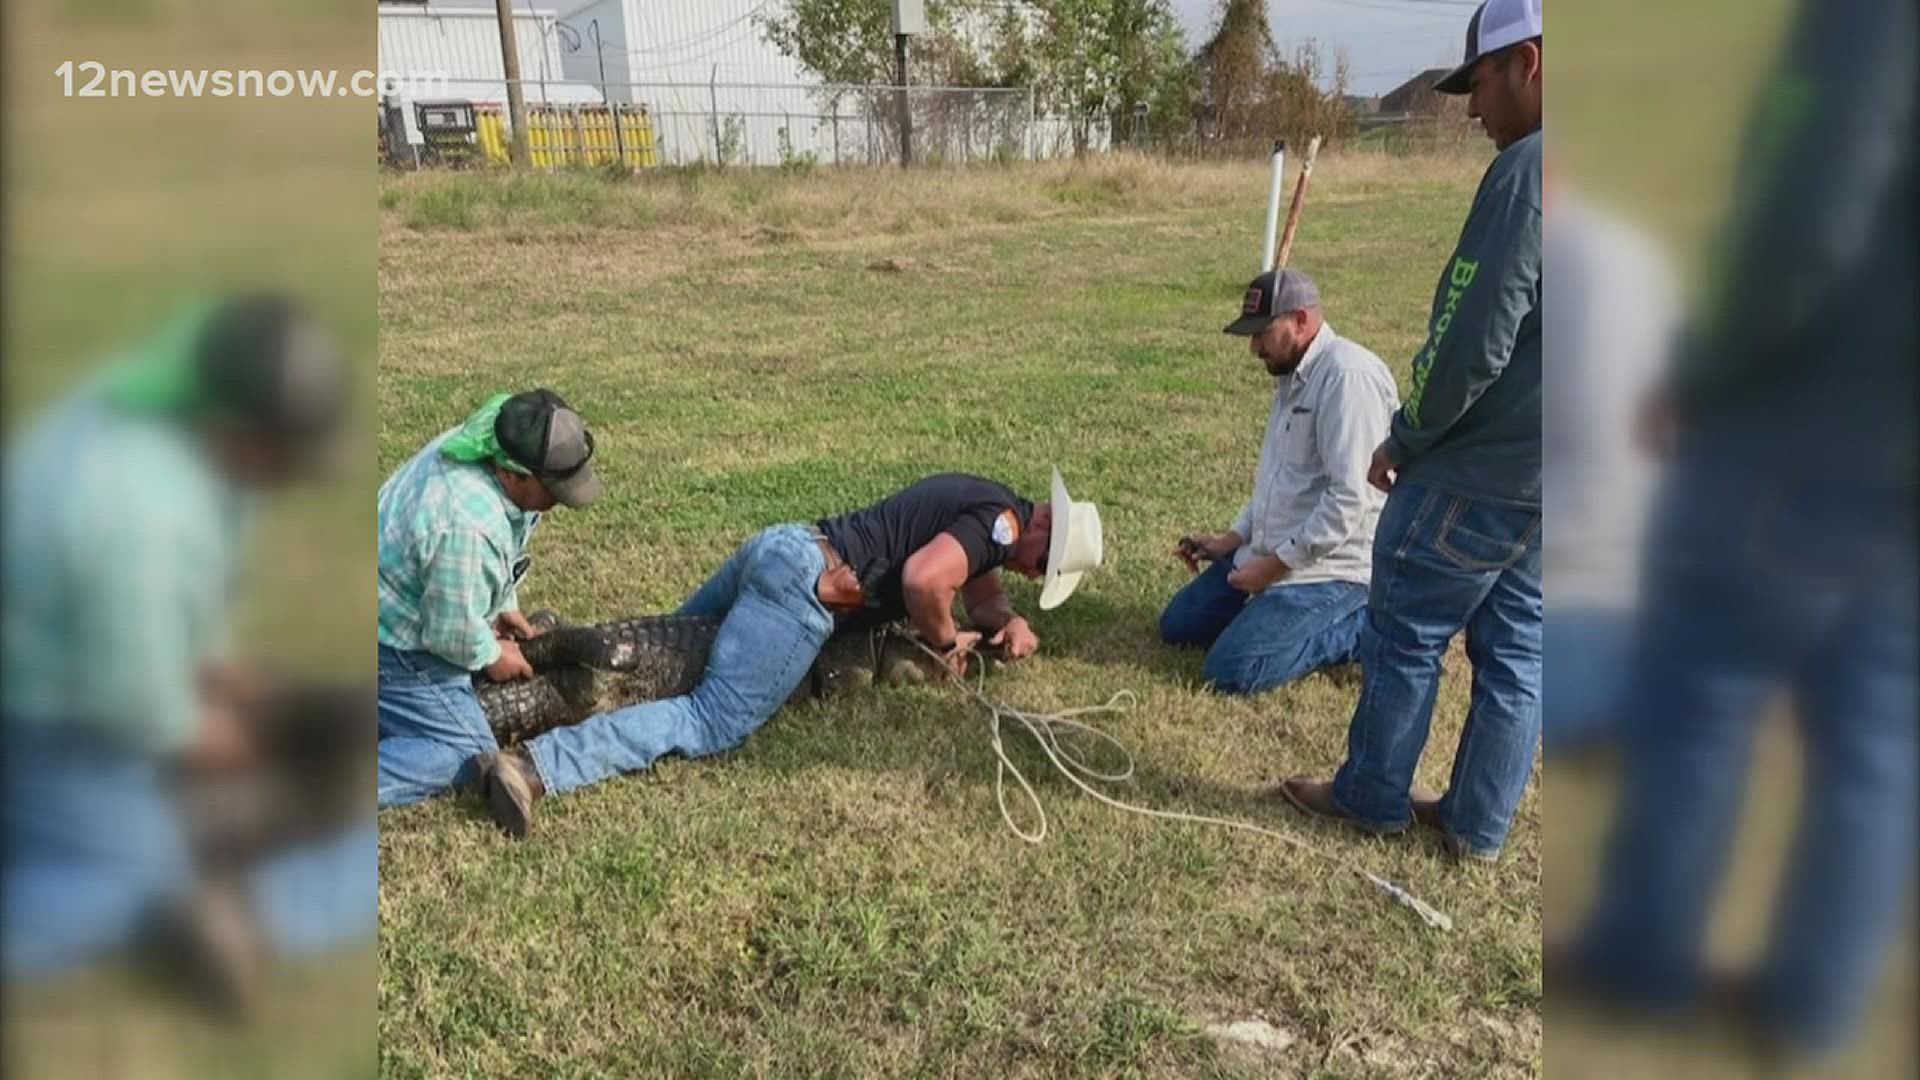 A nearly ten foot alligator was relocated from a Mid-County drainage ditch to a nearby wildlife management area on Wednesday.